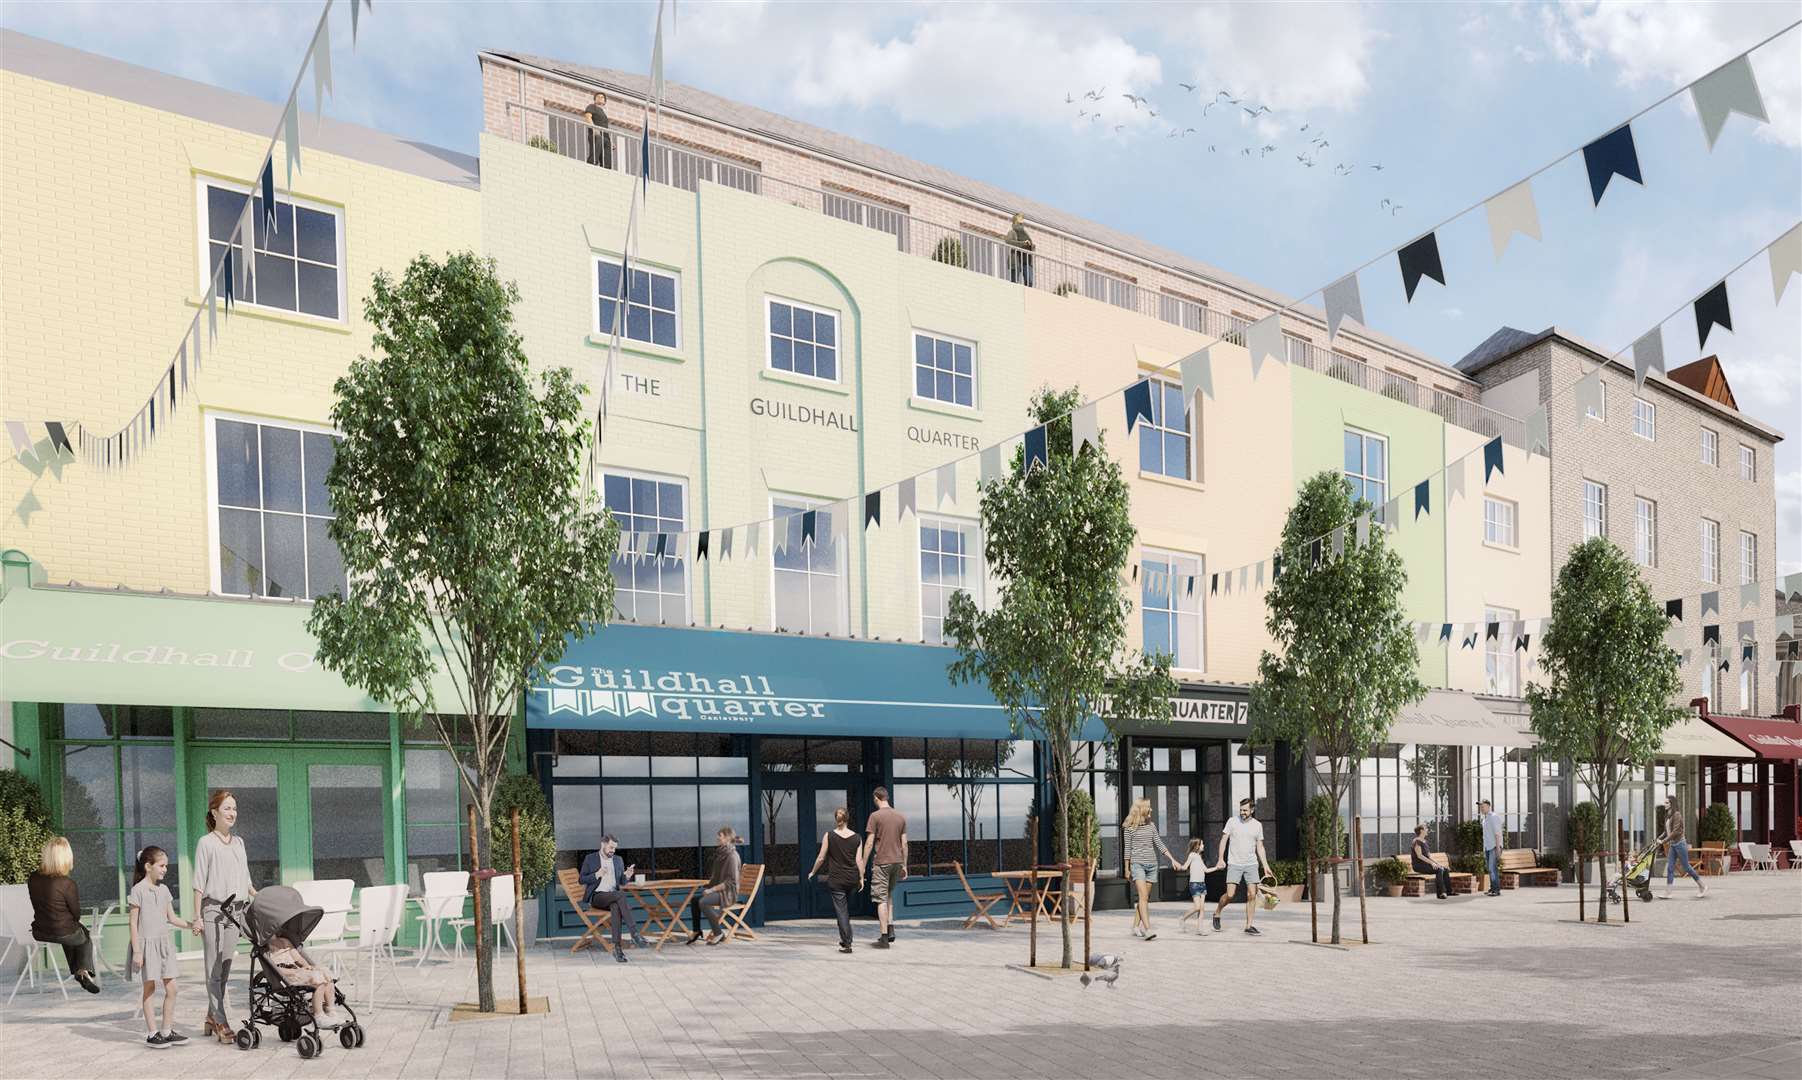 The vision for Debenhams in Guildhall Street, Canterbury